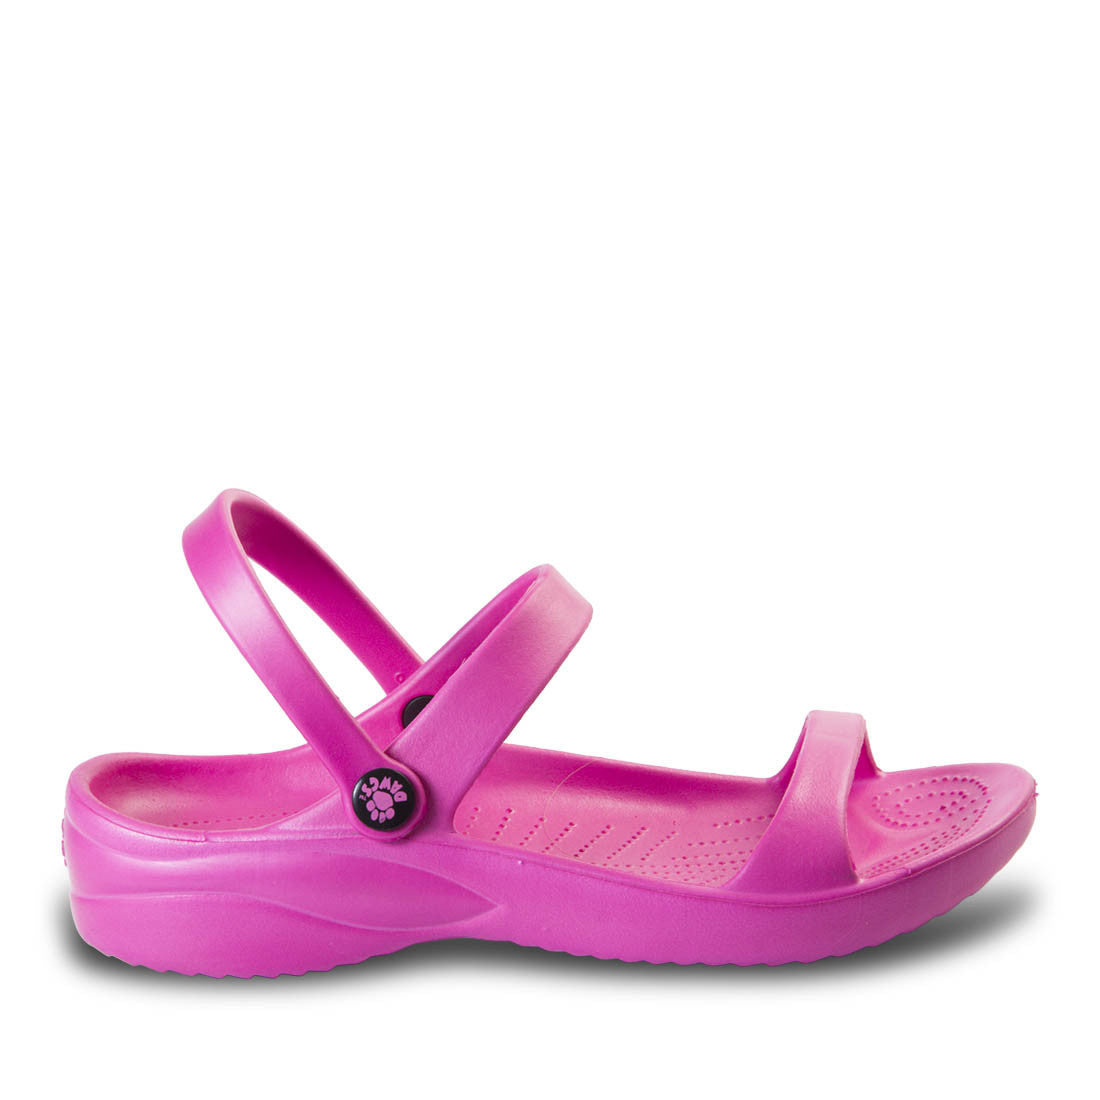 Image of Women's 3-Strap Sandals - Hot Pink